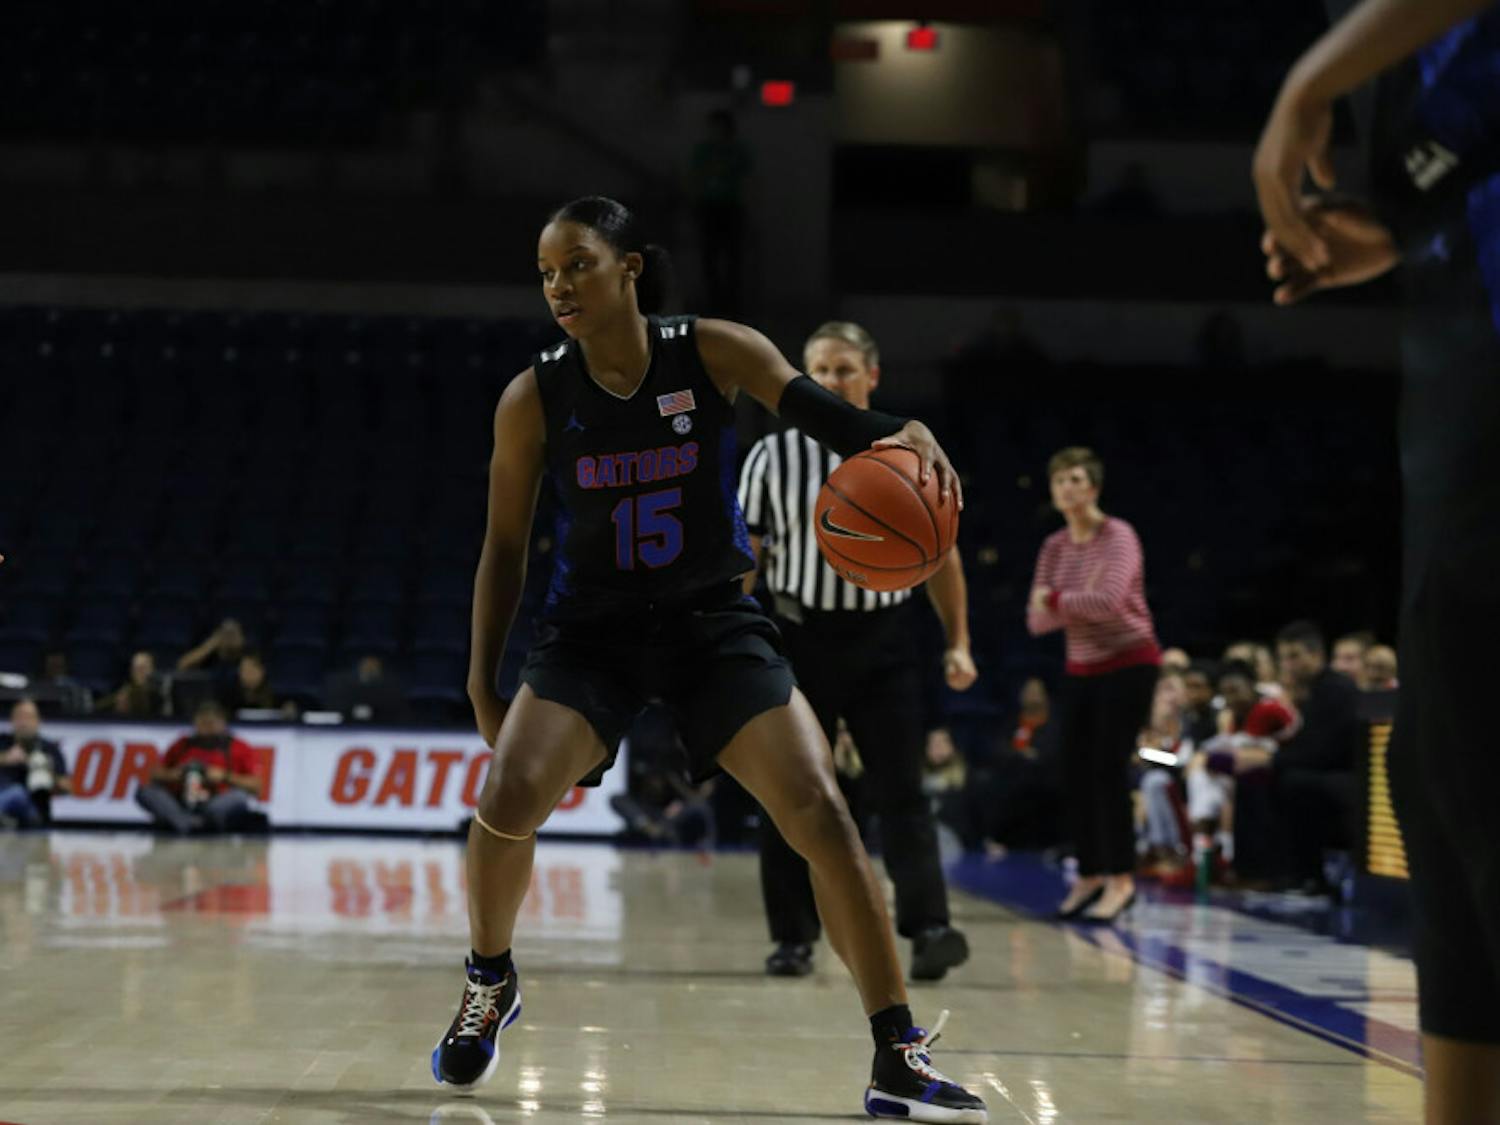 Sophomore guard Nina Rickards put up 18 points and sot 4-6 from deep in the Gators loss to the Seminoles.